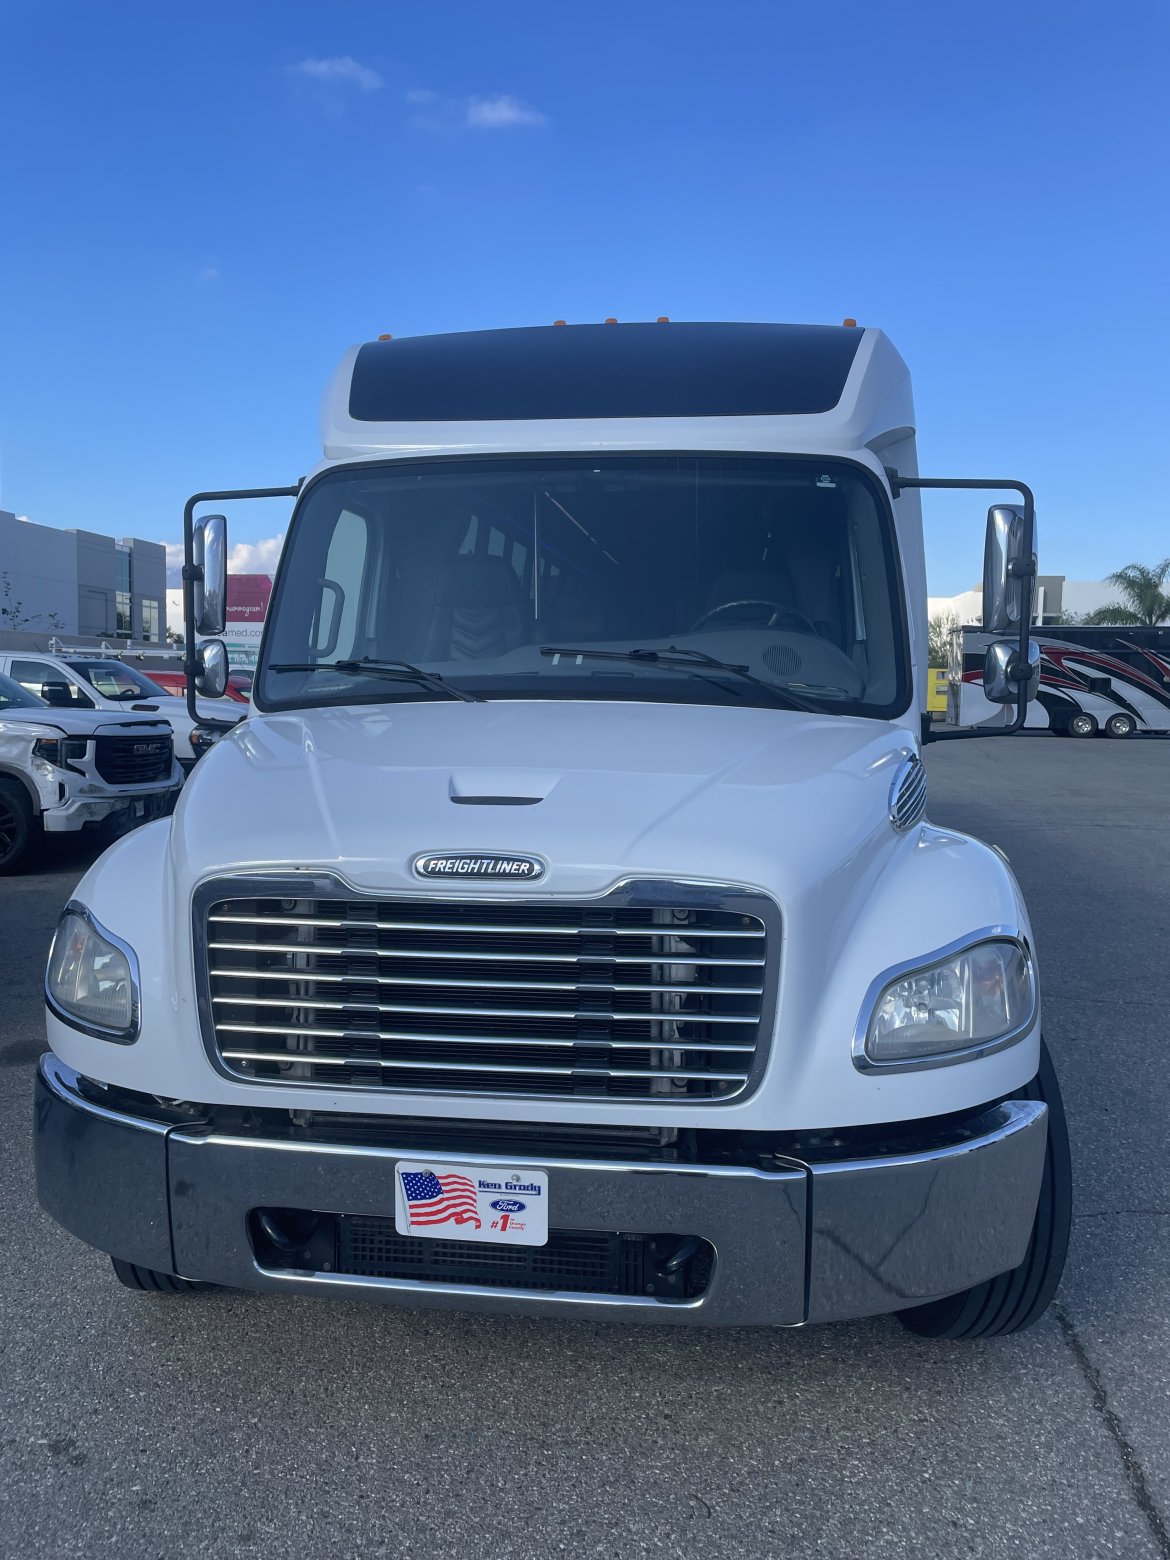 Executive Shuttle for sale: 2017 Freightliner M2 40&quot; by Grech Motors